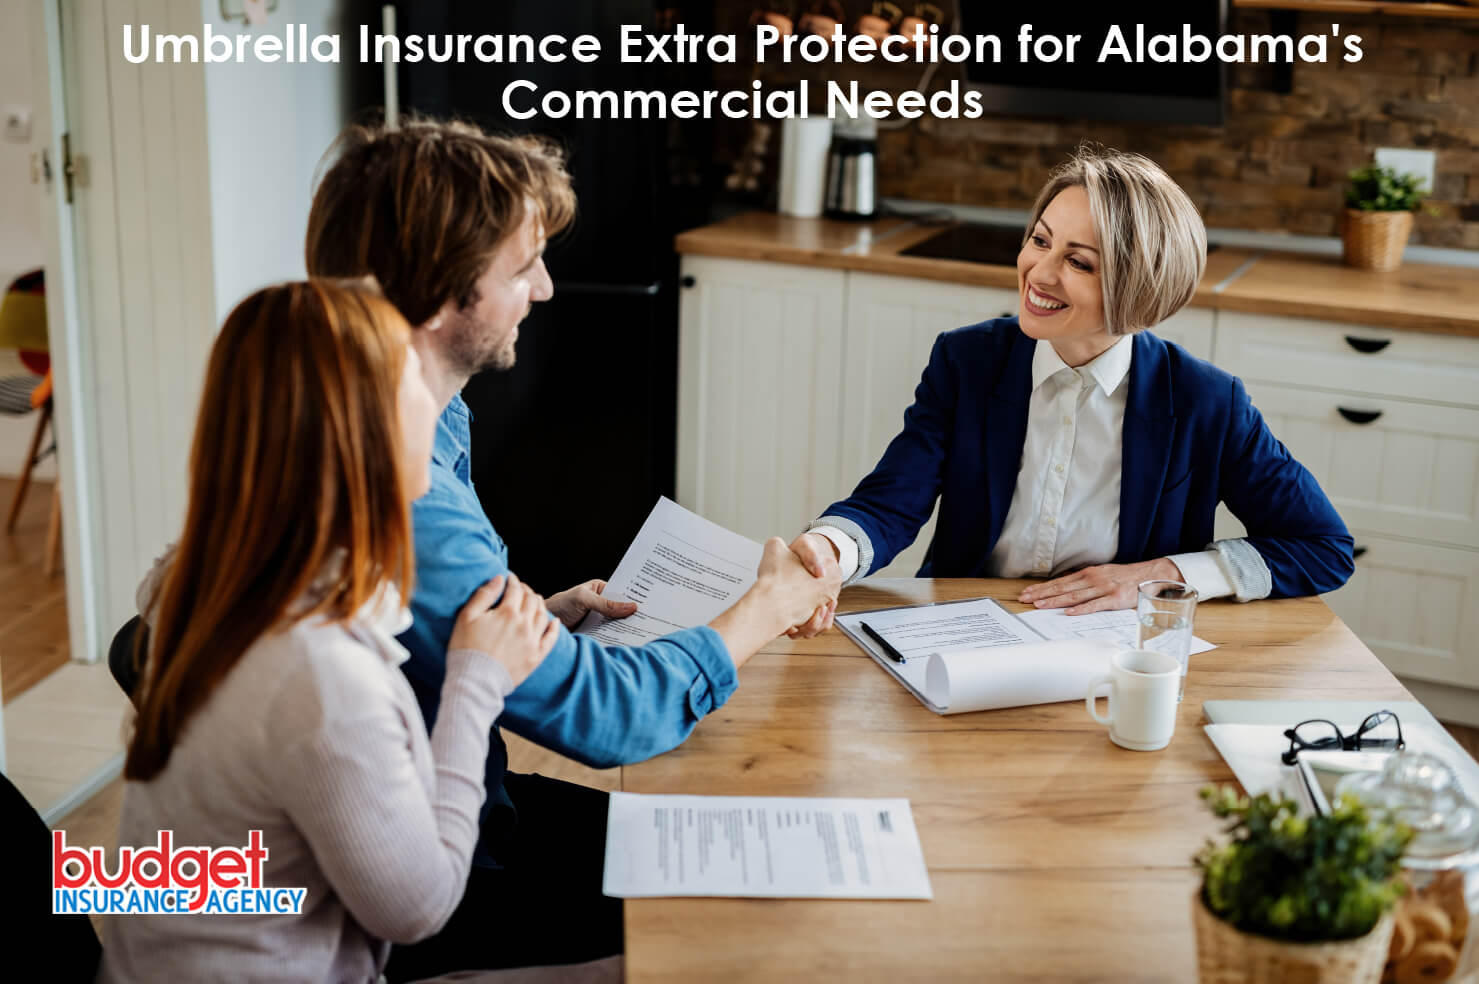 Umbrella Insurance: Extra Protection for Alabama's Commercial Needs